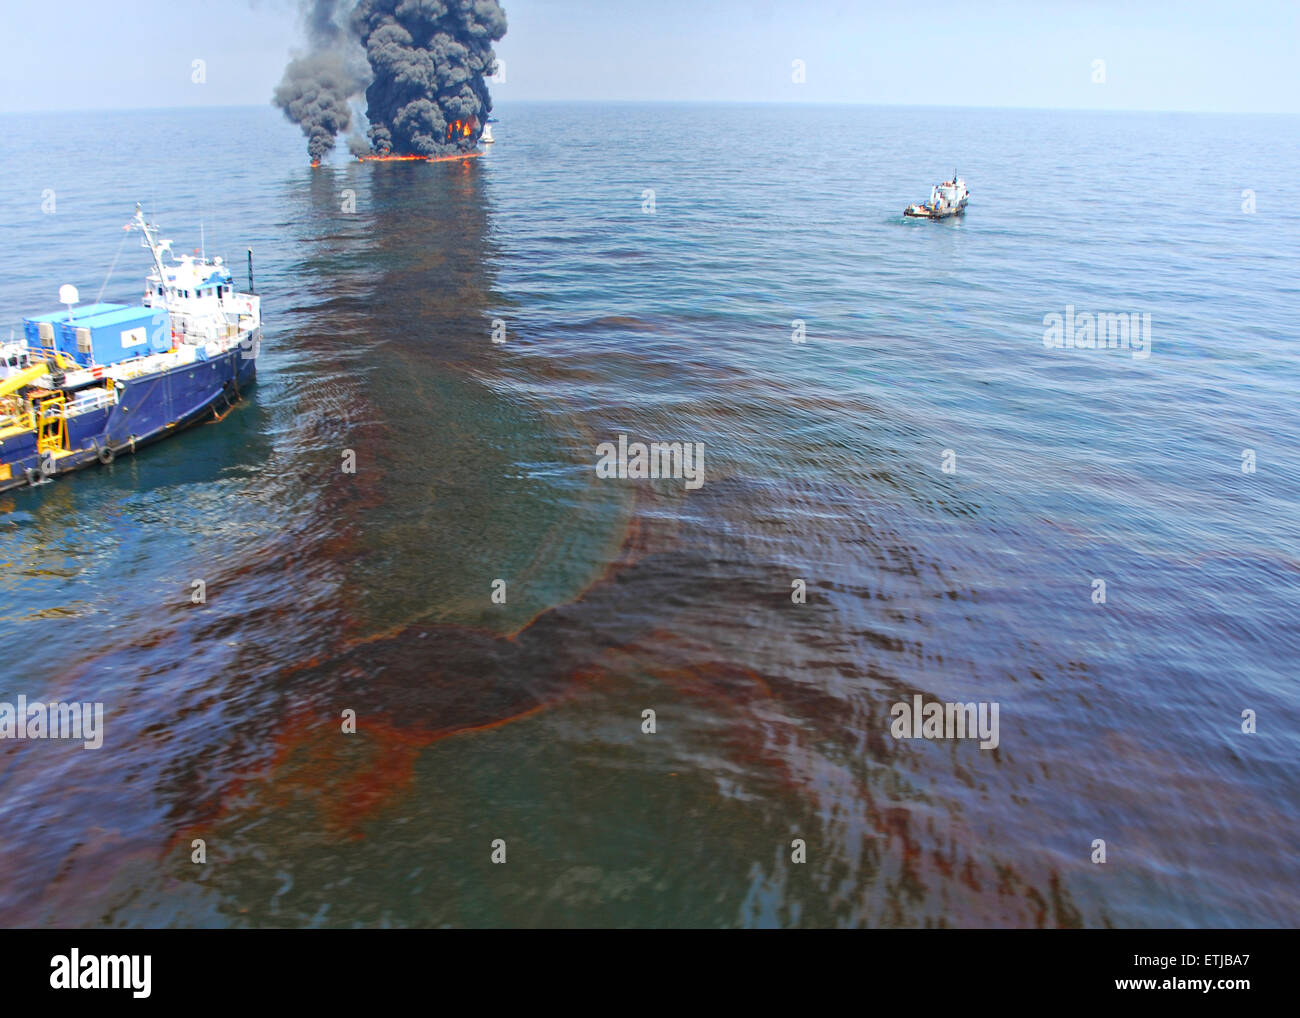 Oil floats on the surface as clean up crews conduct controlled burns following the BP Deepwater Horizon oil spill disaster as efforts to contain and clean the millions of gallons of crew continue June 9, 2010 in the Gulf of Mexico. Stock Photo